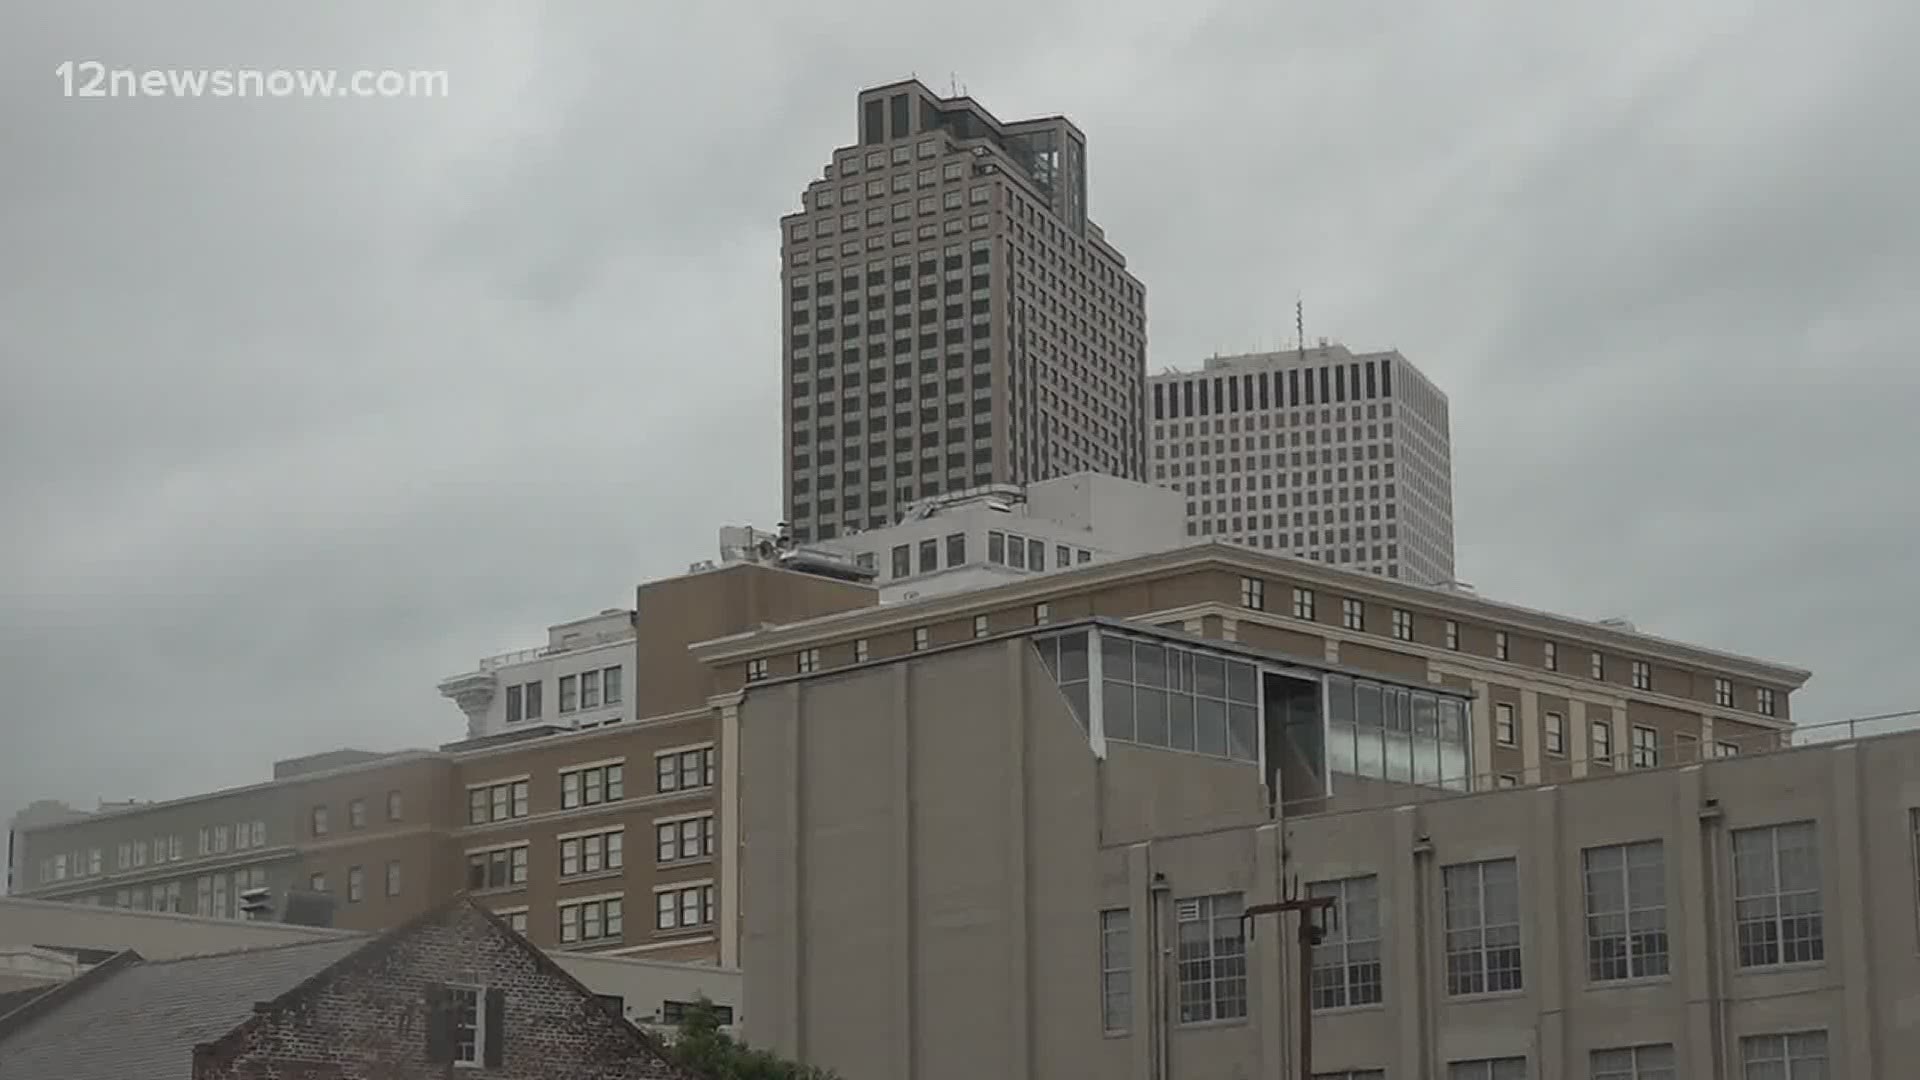 Many of those who evacuated are housed in 37 New Orleans hotels